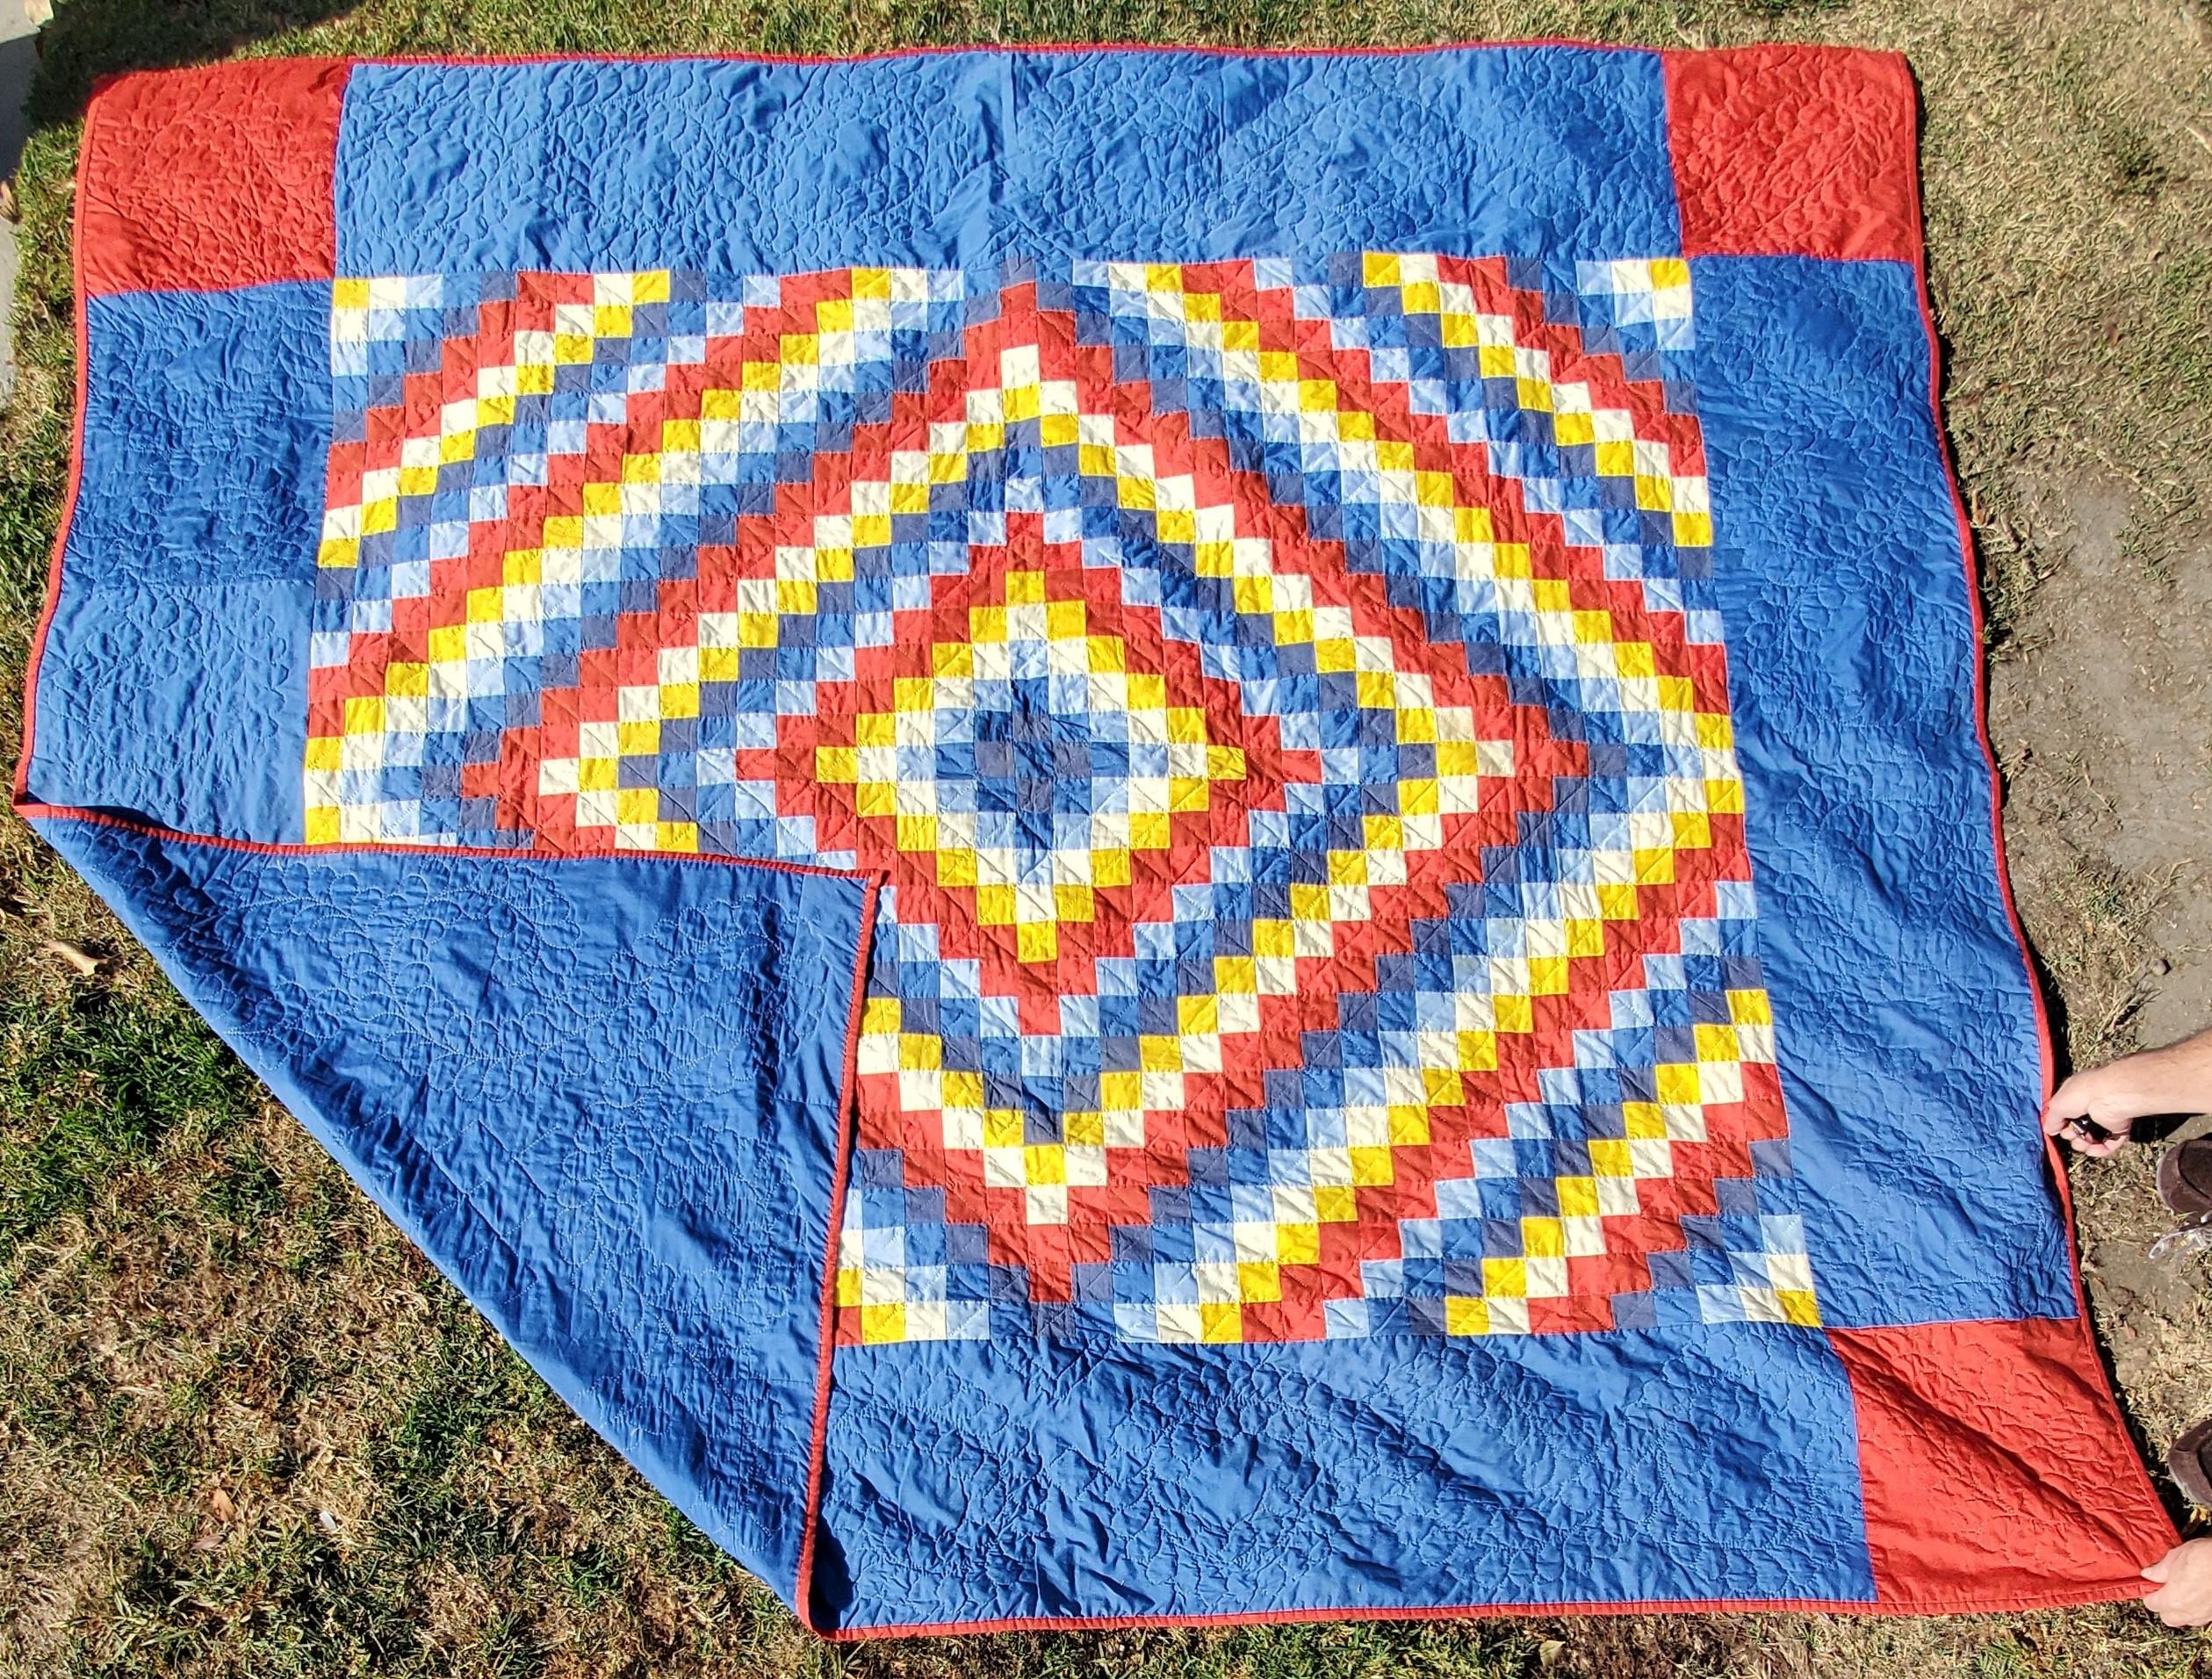 This finely quilted and pieced Philadelphia pavement quilt is in very good condition. The quilt is similar in pattern like a sunshine and shadow. The red corner blocks are a nice finishing touch. This quilt is all cotton and comes from Lancaster